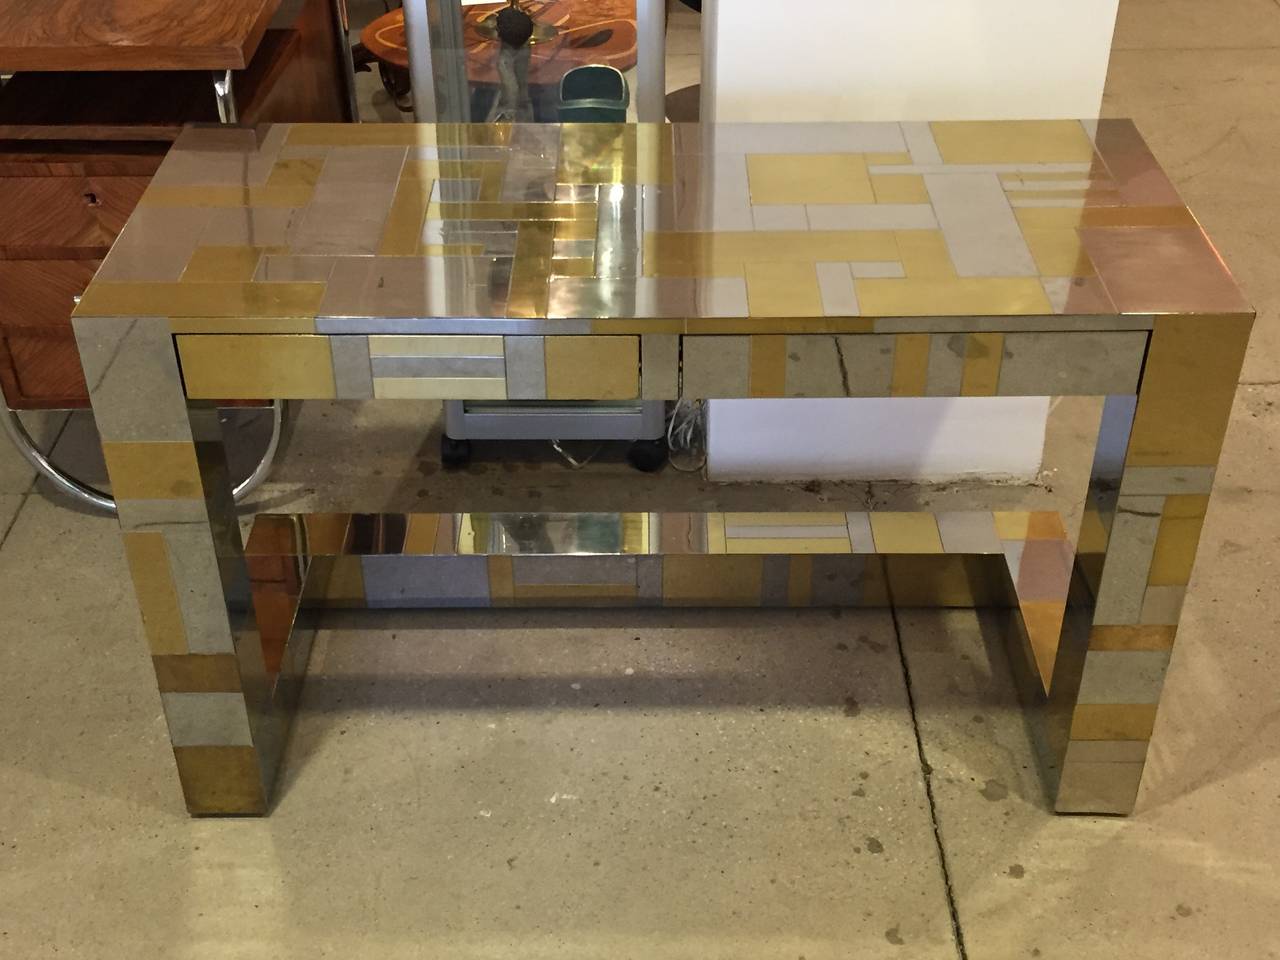 Beautiful brass and steel cityscape desk by Paul Evans. Desk has two drawers. Piece is signed. Has some wear.